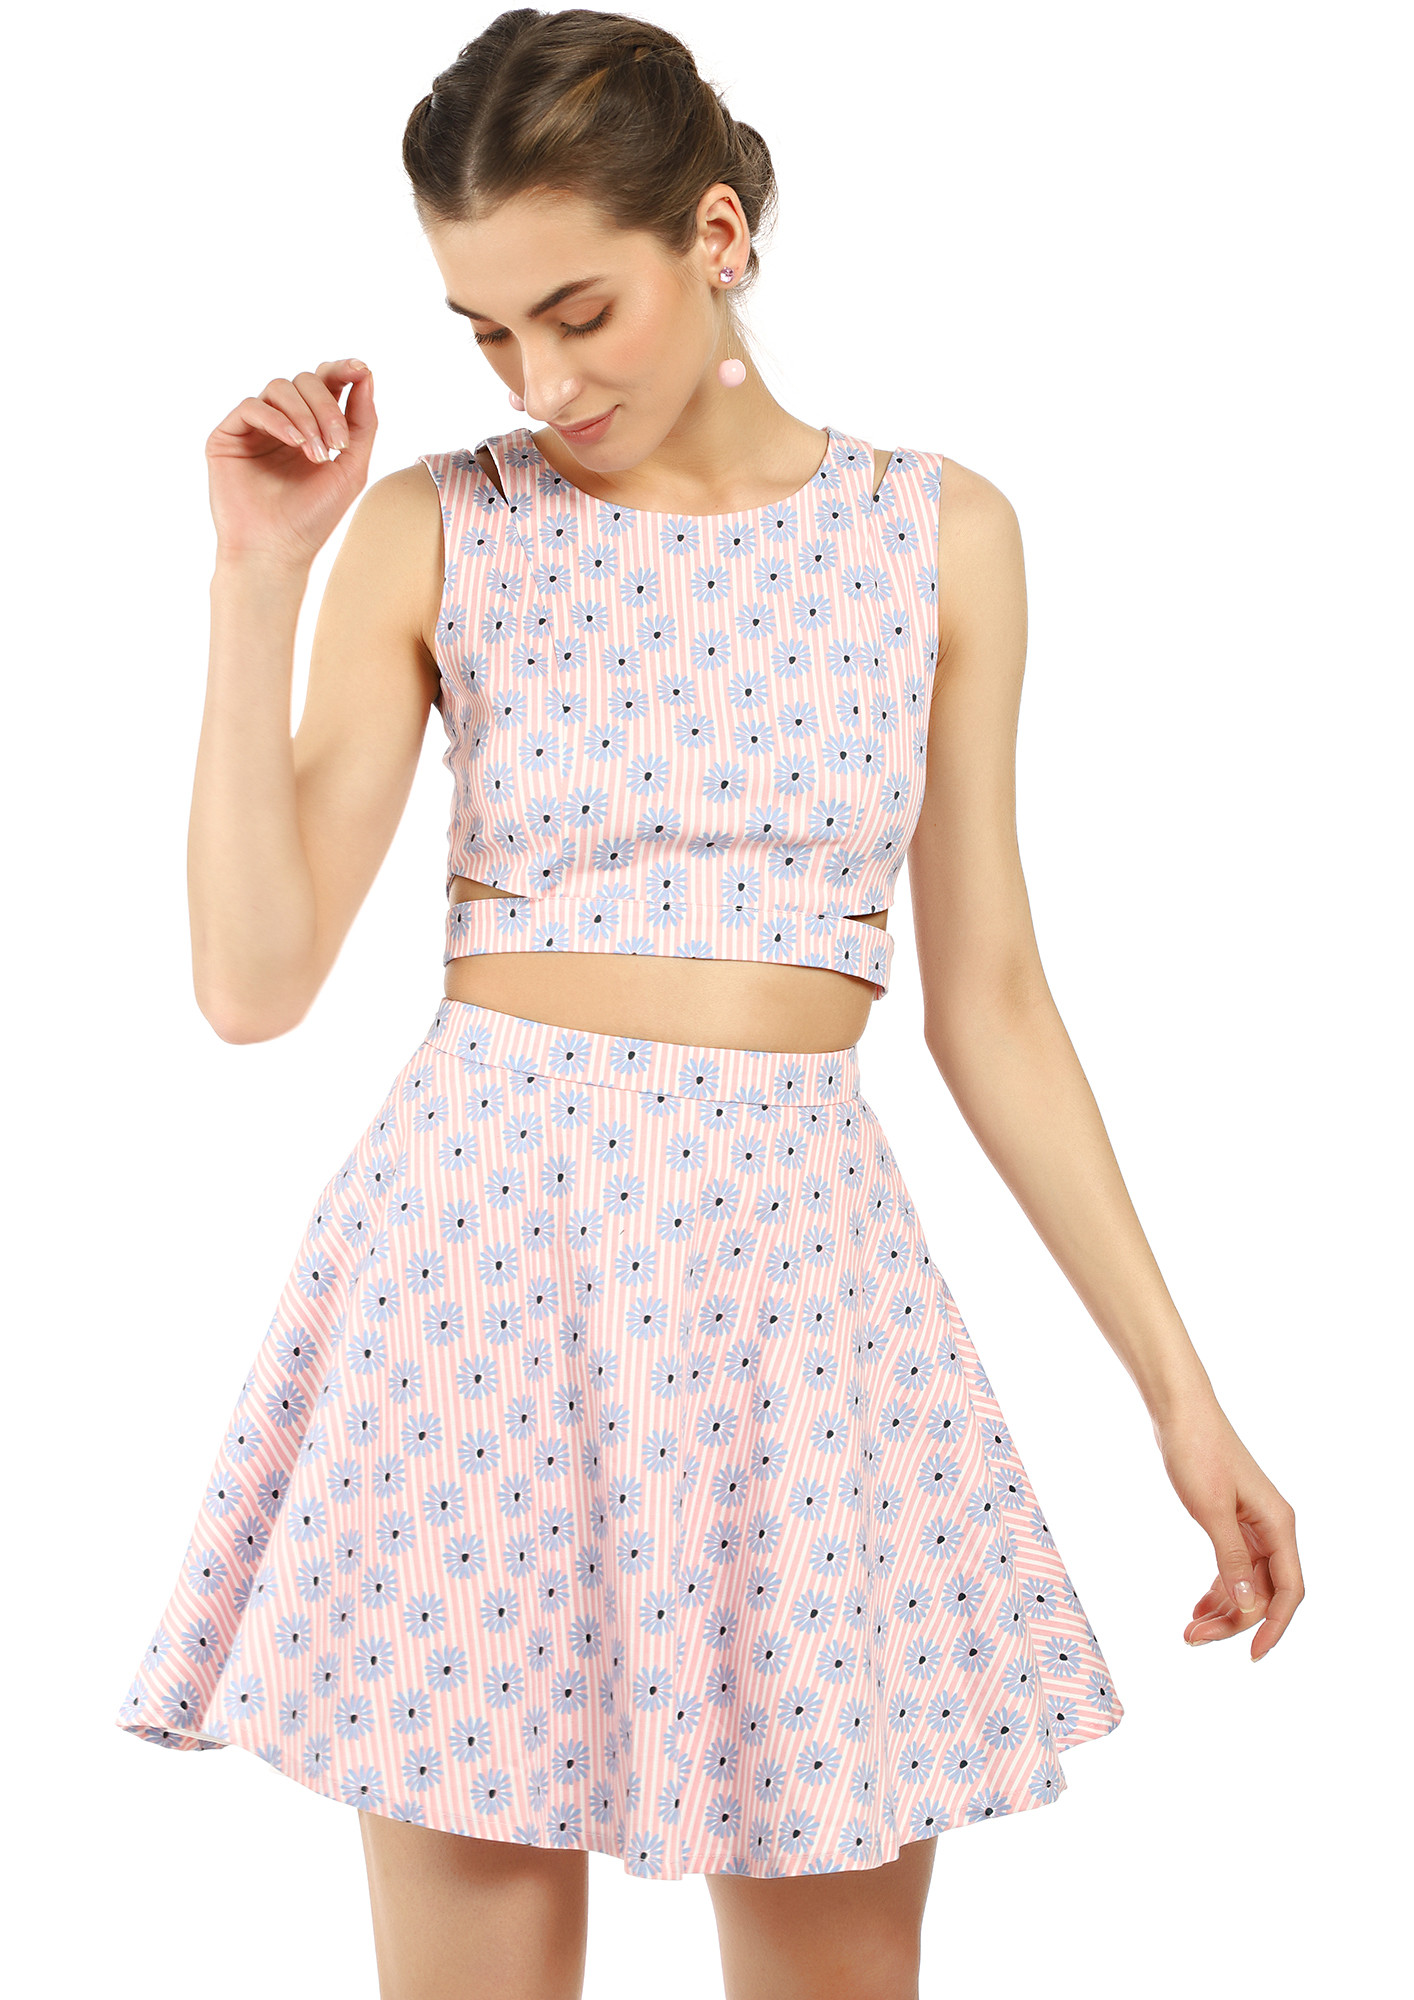 BLOOMY SIDE UP PINK TWO PIECE